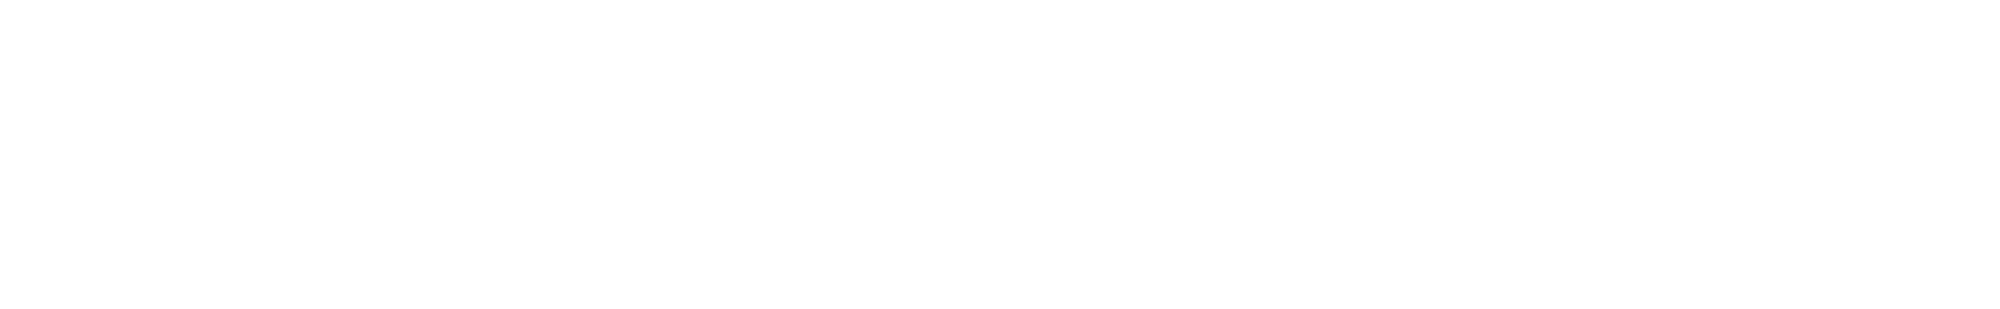 The Man Who Knew Too Much logo